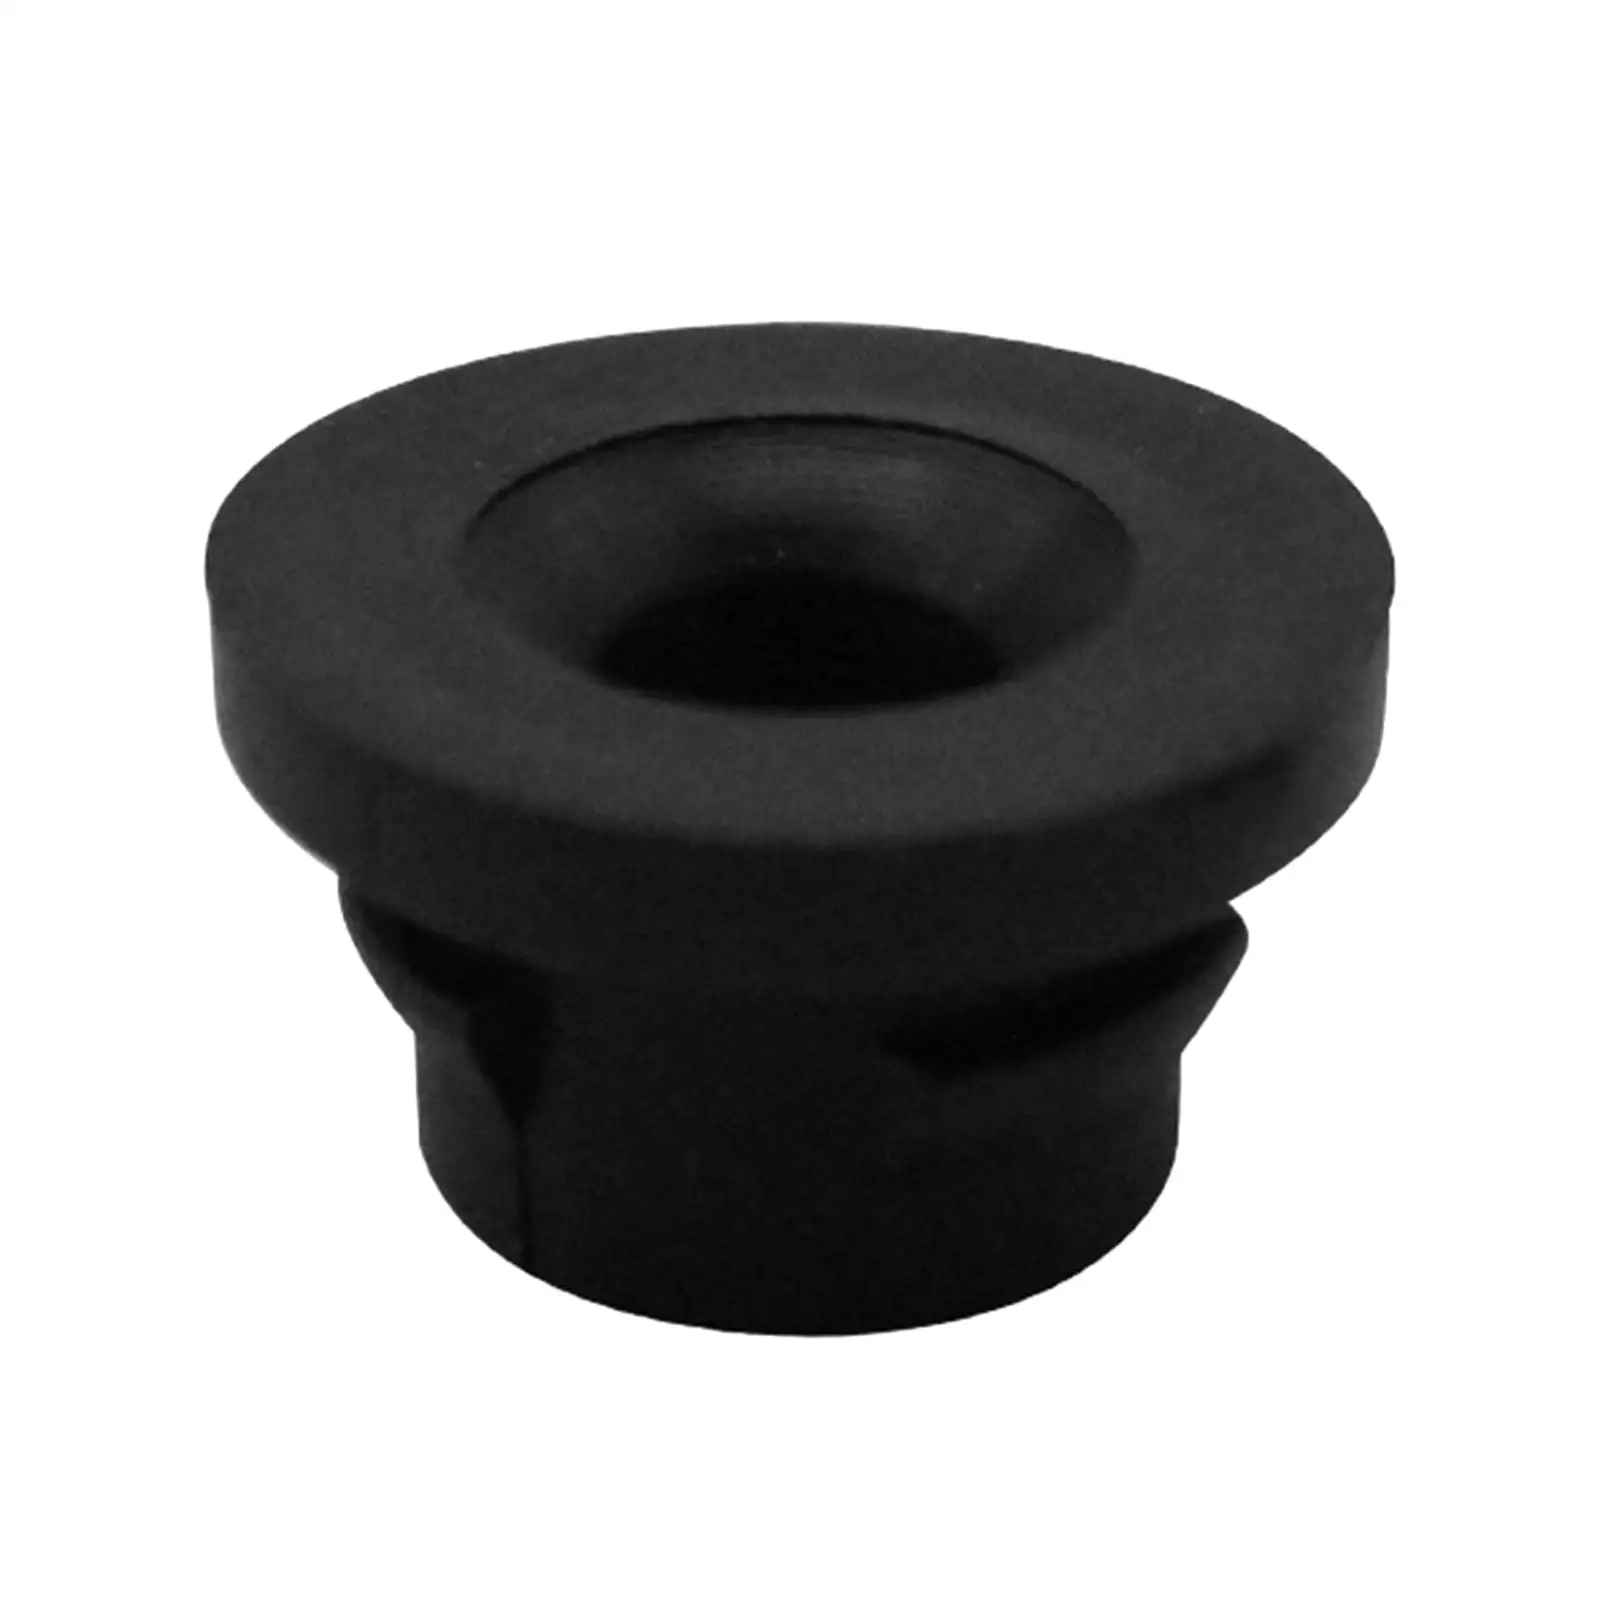 Car Air Filter Rubber Insert Fit for 1.6 Hdi Berlingo for